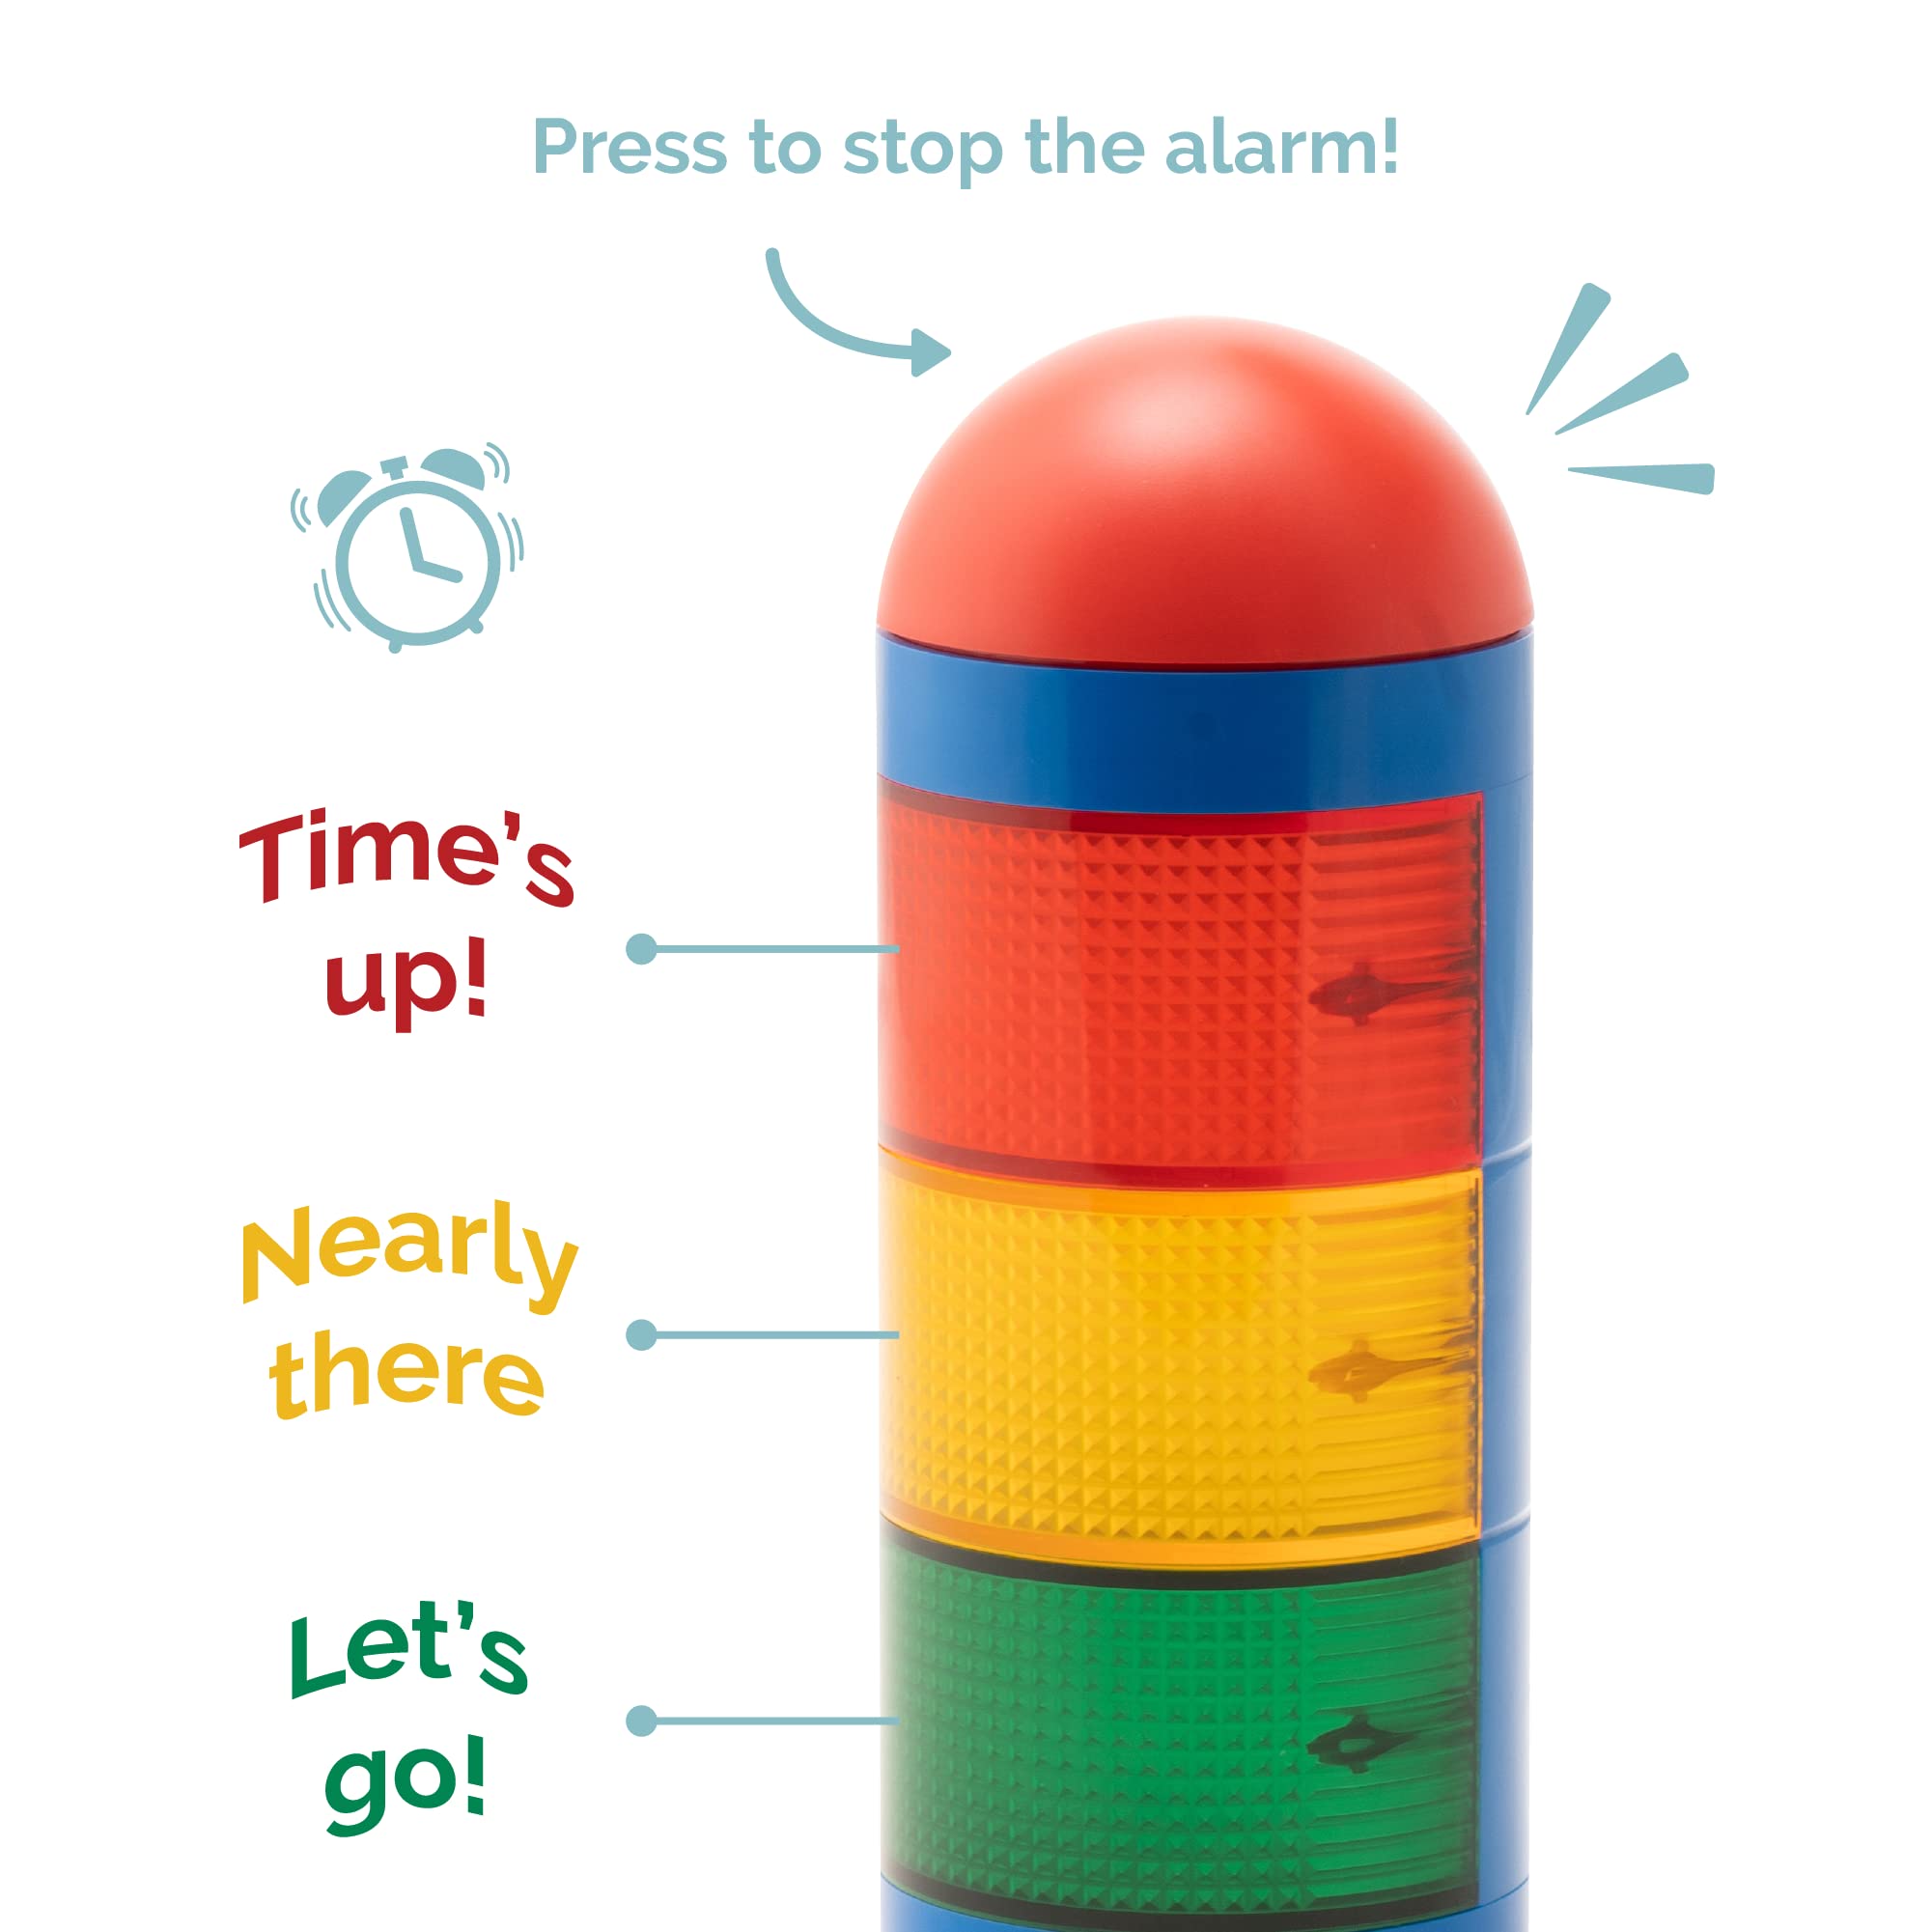 Kadams Visual Timer for Kids with Audio Alarm - Traffic Light Alarm for Kids, Teachers, Classroom, Home, Time Management Tool, 24hr Countdown, Pause Function, Auto Timer - Blue